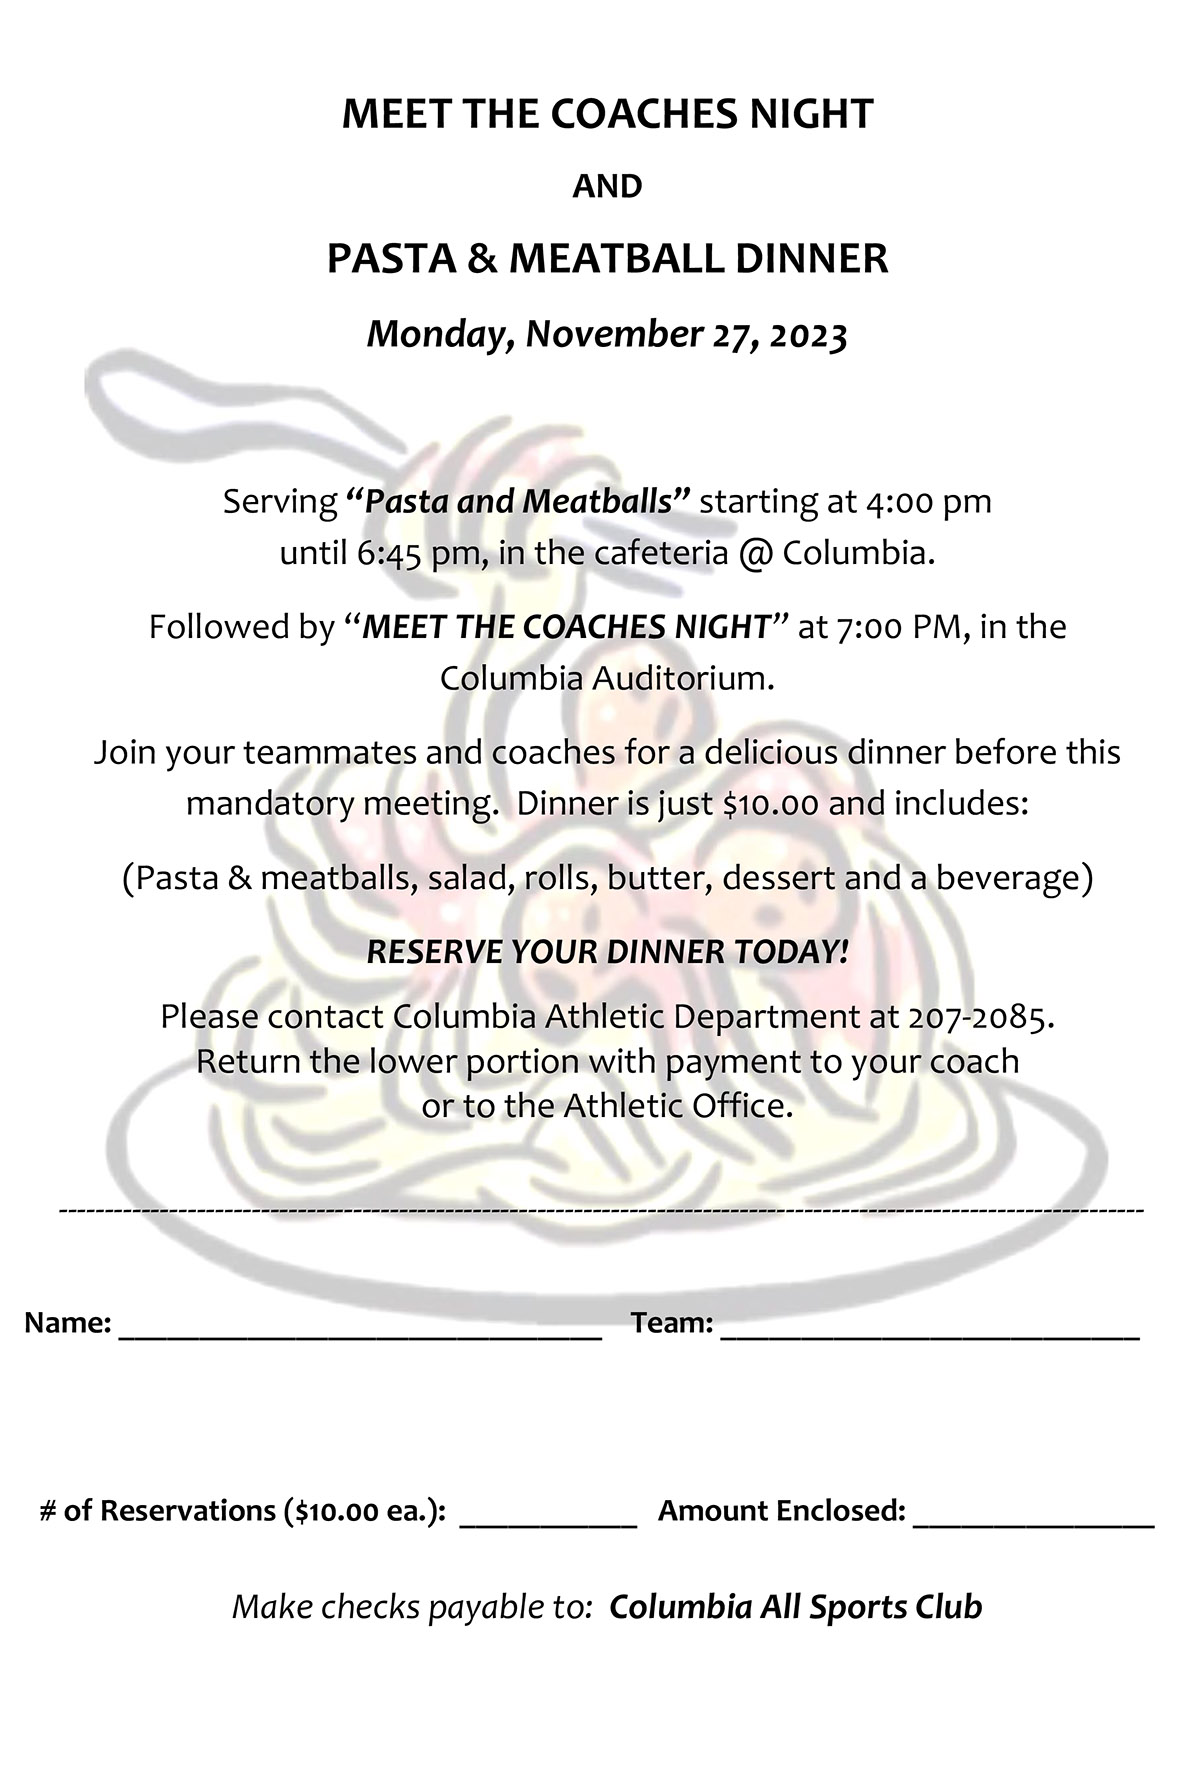 Pasta and Meatball Dinner flyer